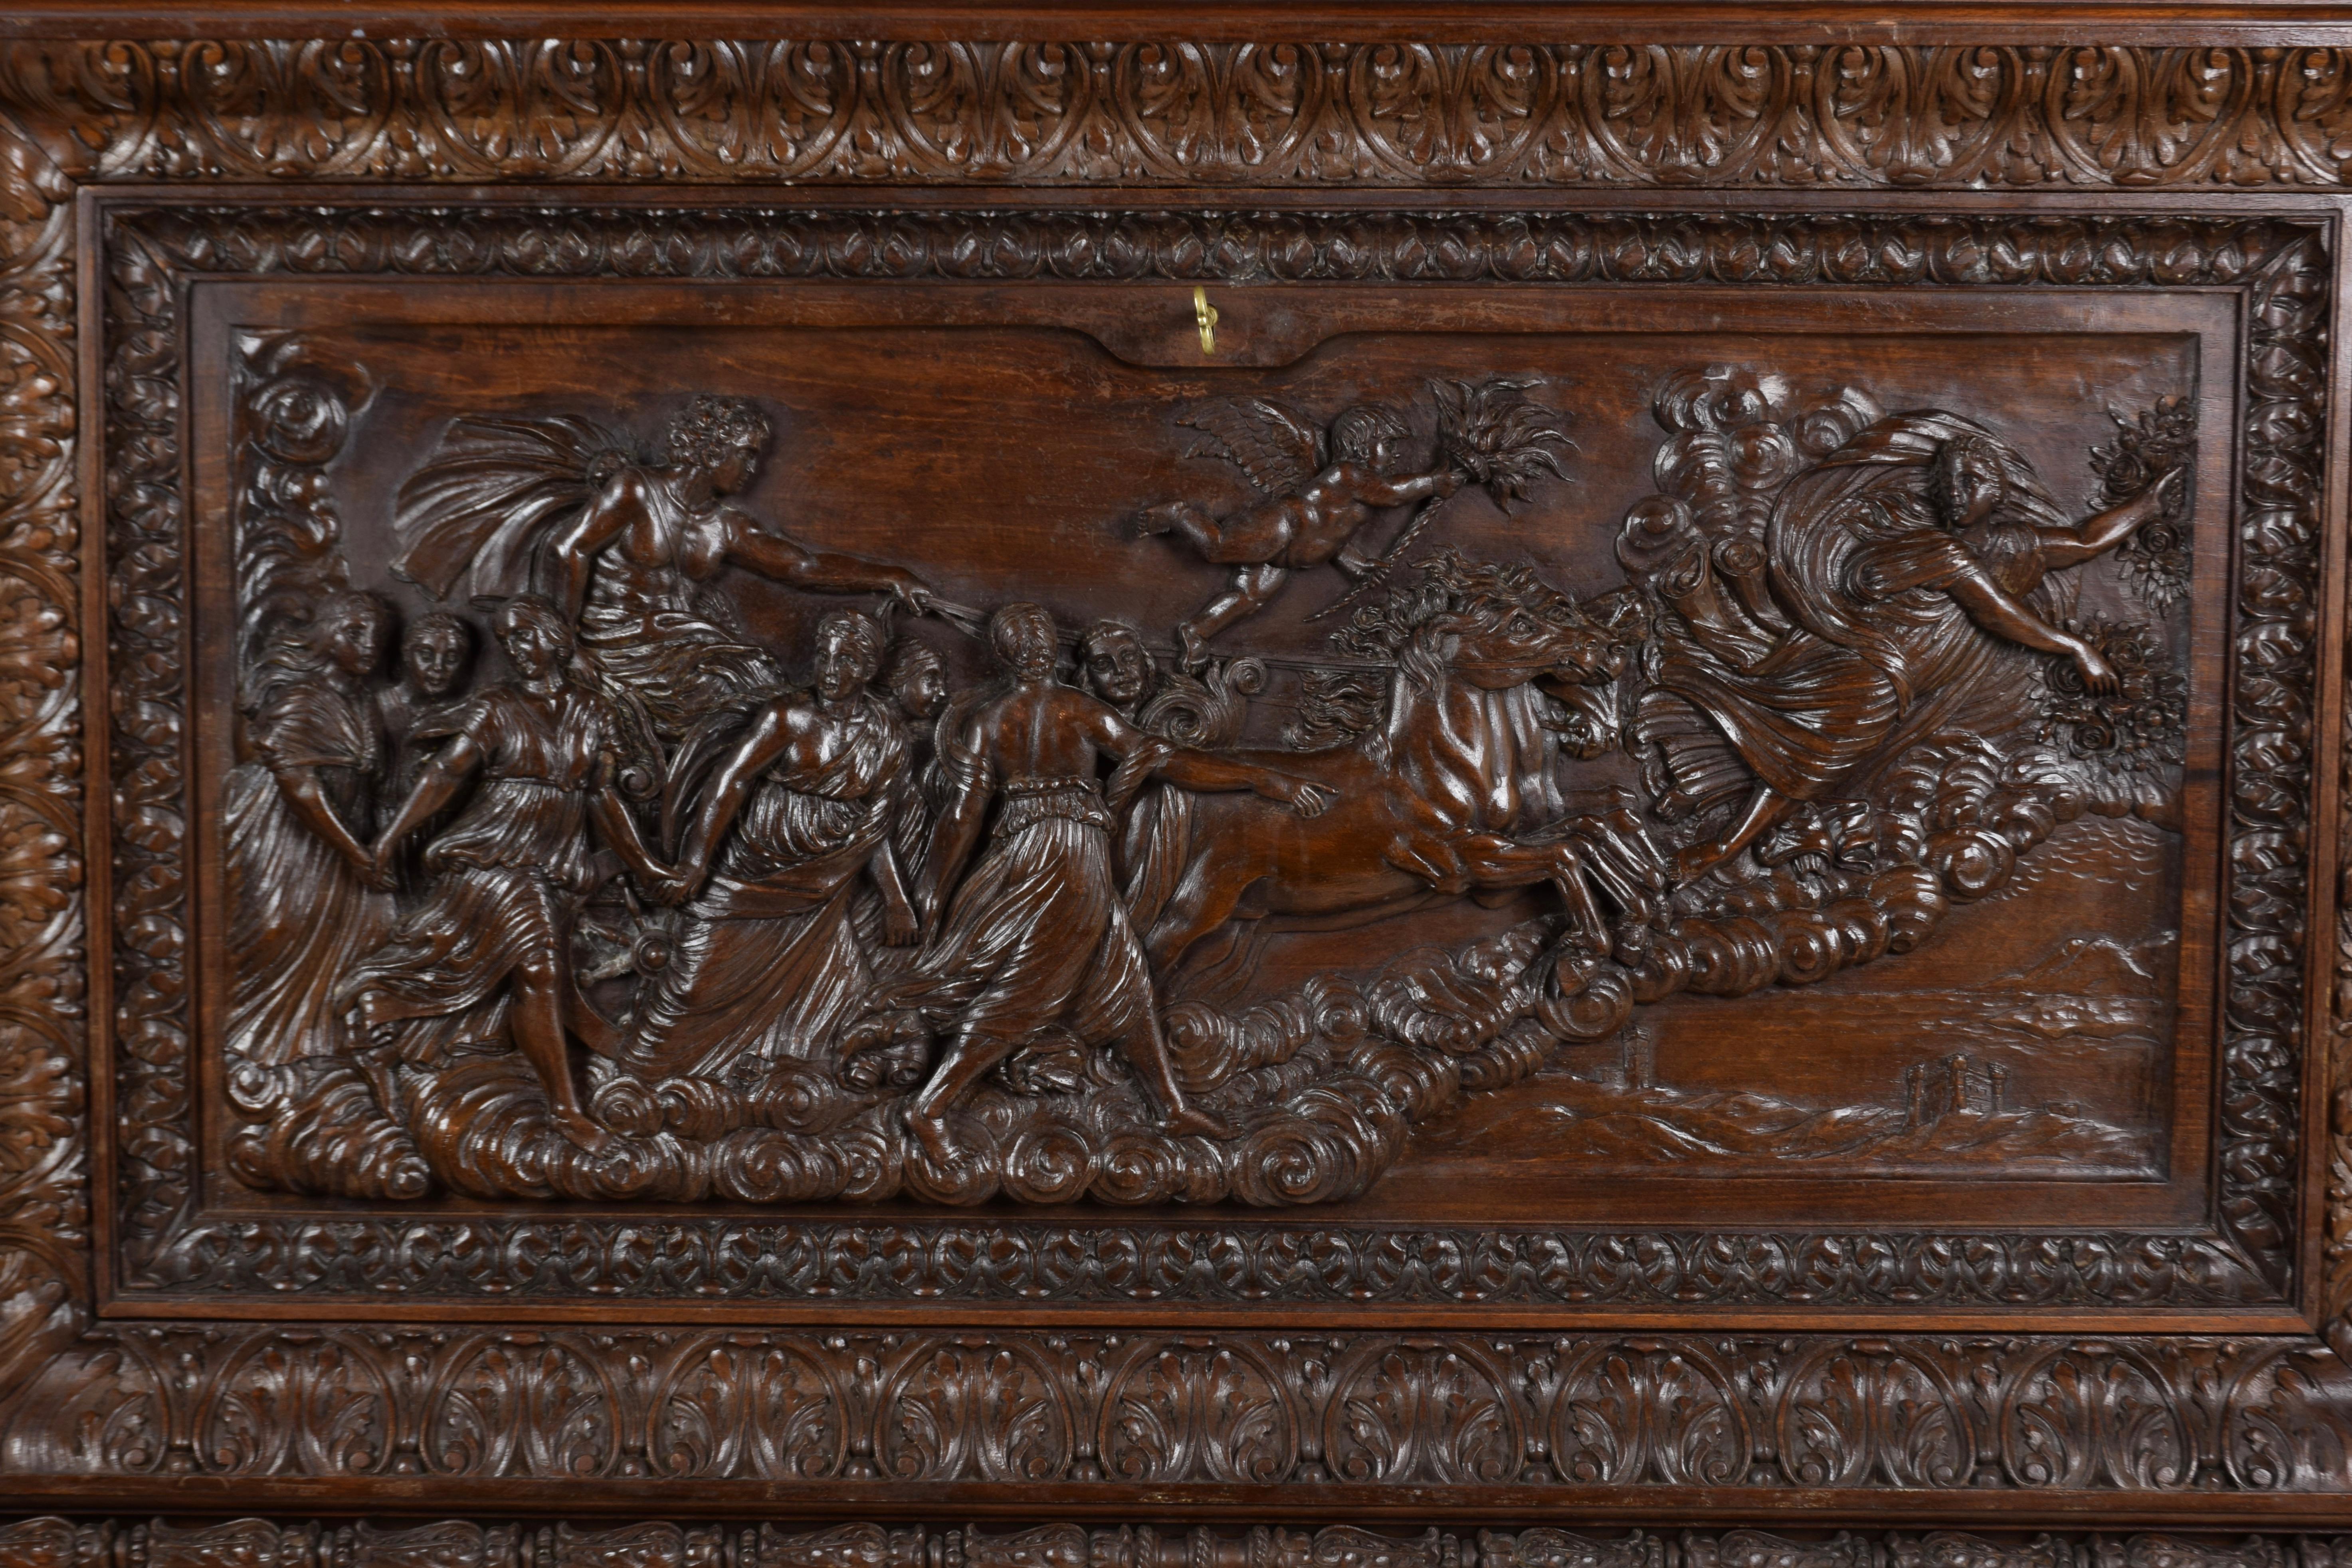 Hand-Carved Walnut Dry Bar Cabinet Carved by Hand Depicting the 